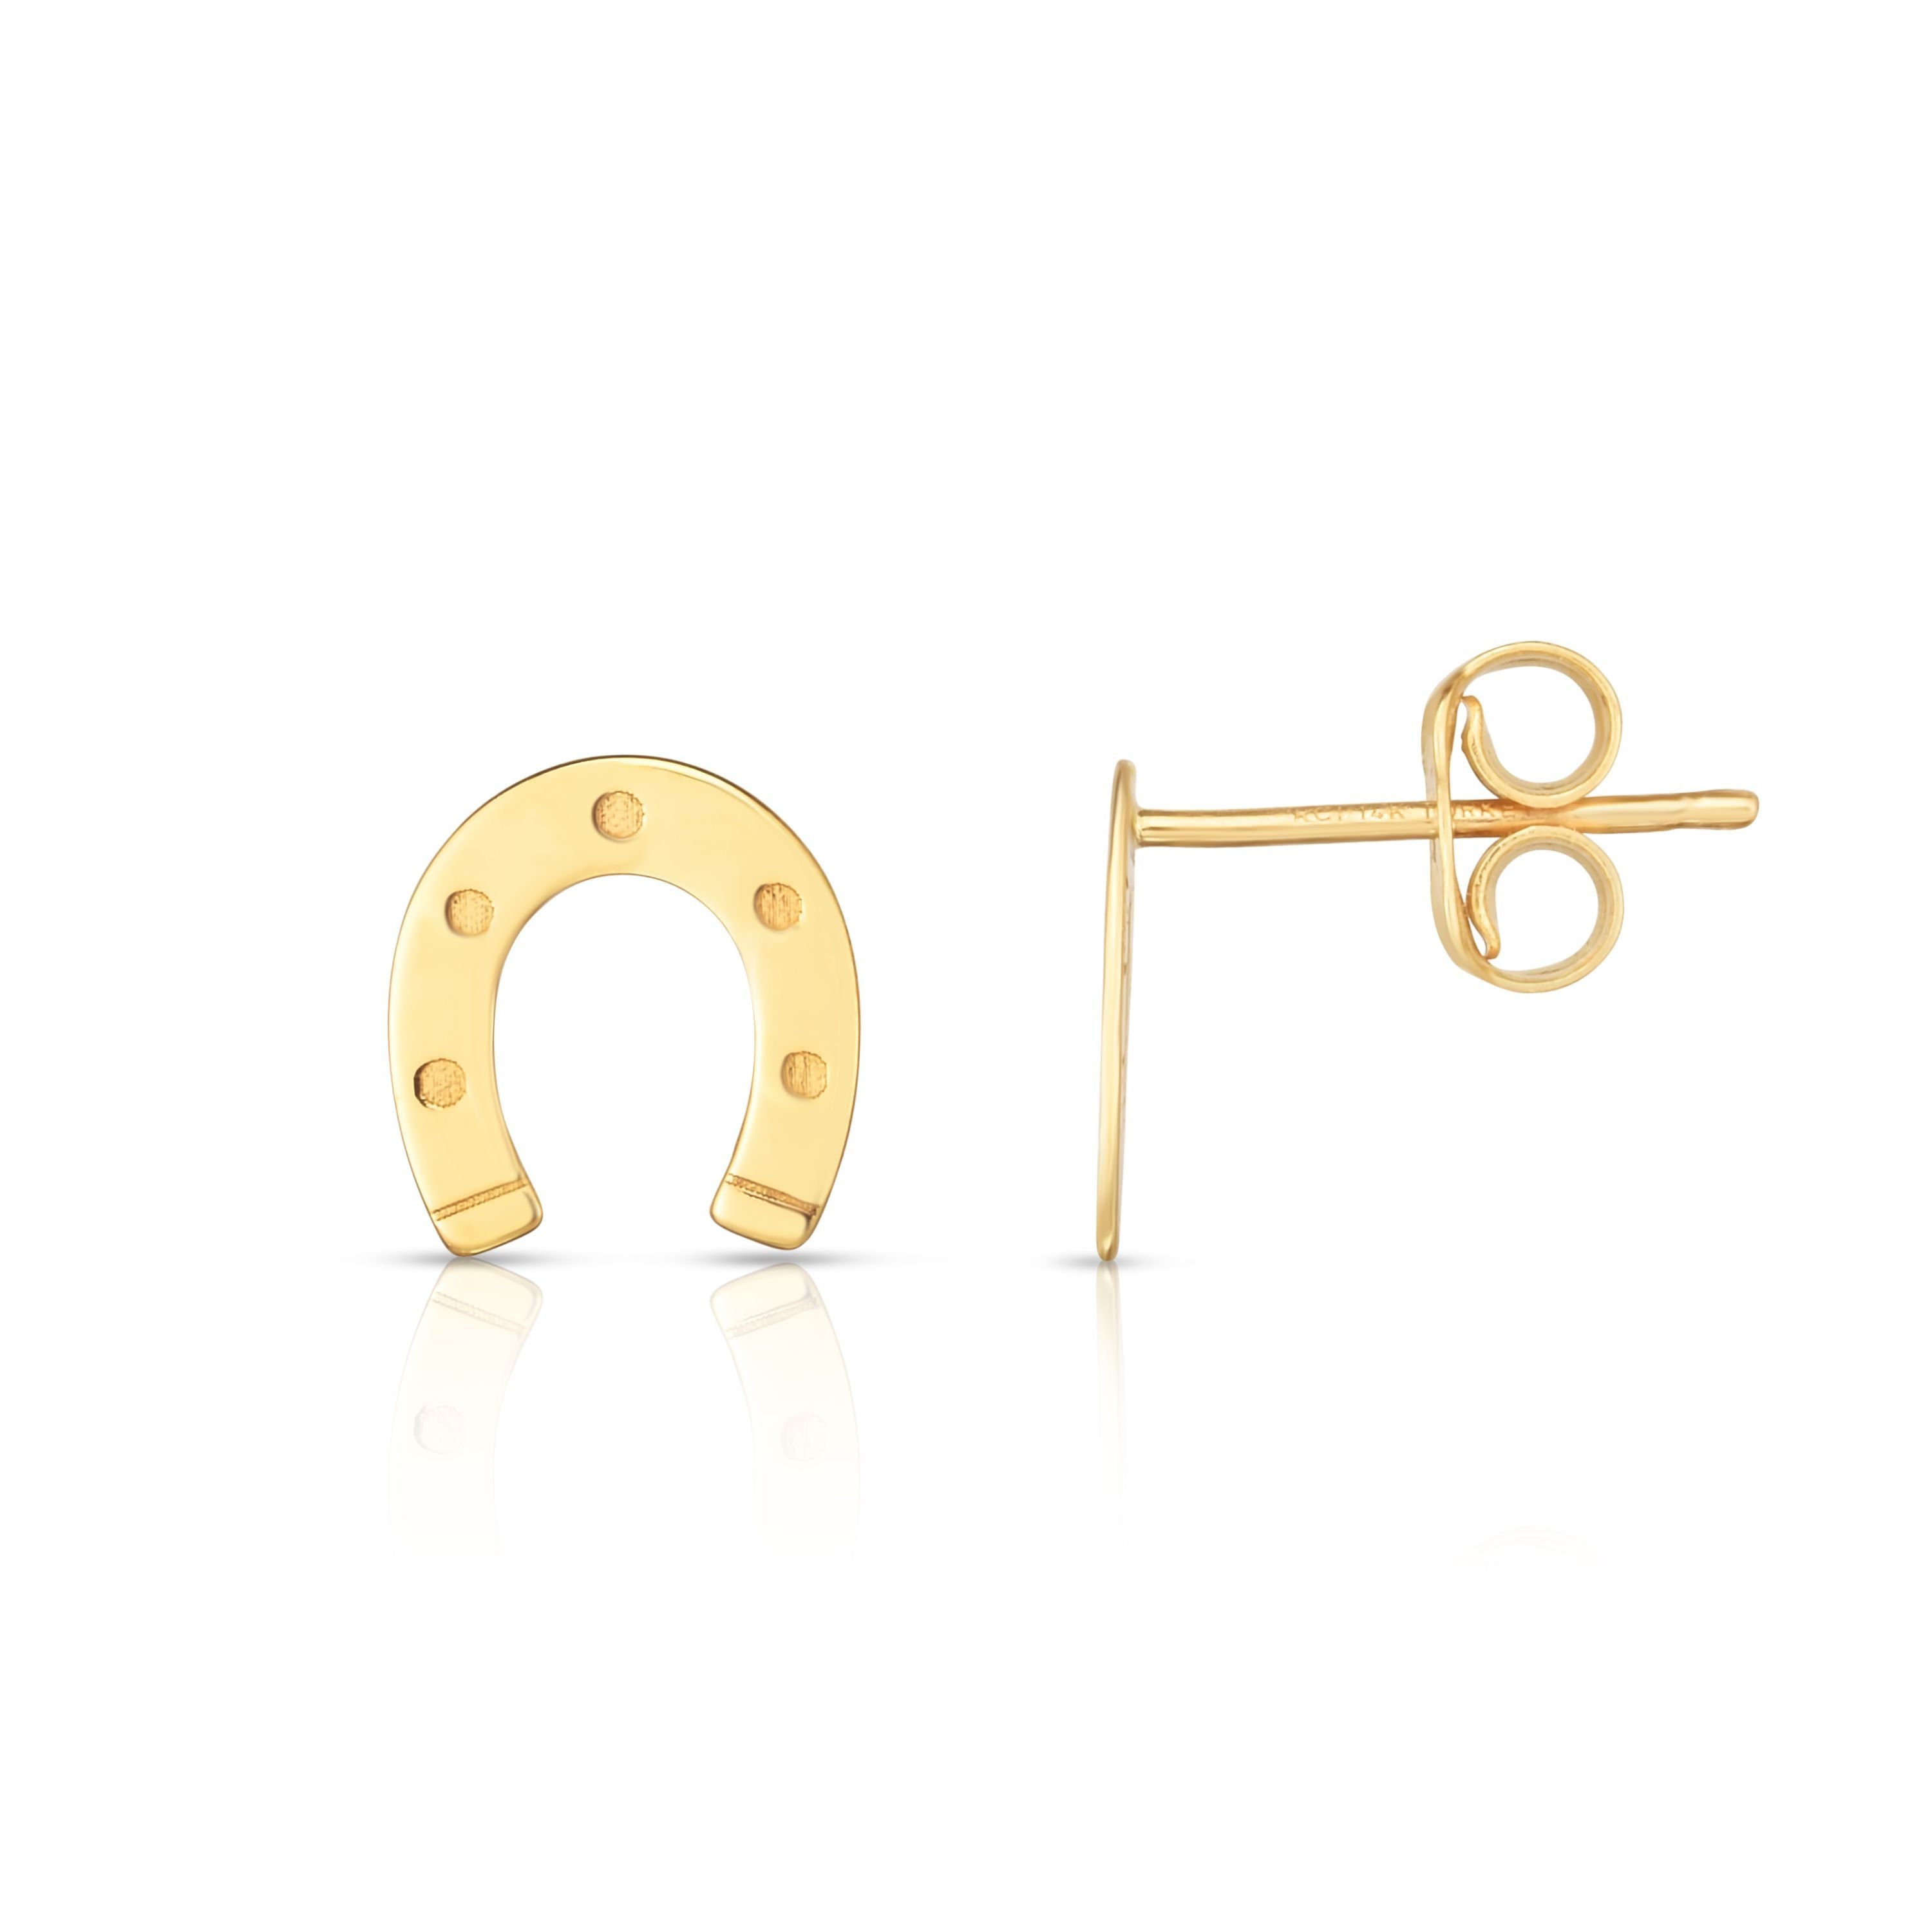 14k Minimalist Solid Gold Horseshoe Stud Earrings, Necklace or Earrings and Necklace Combo